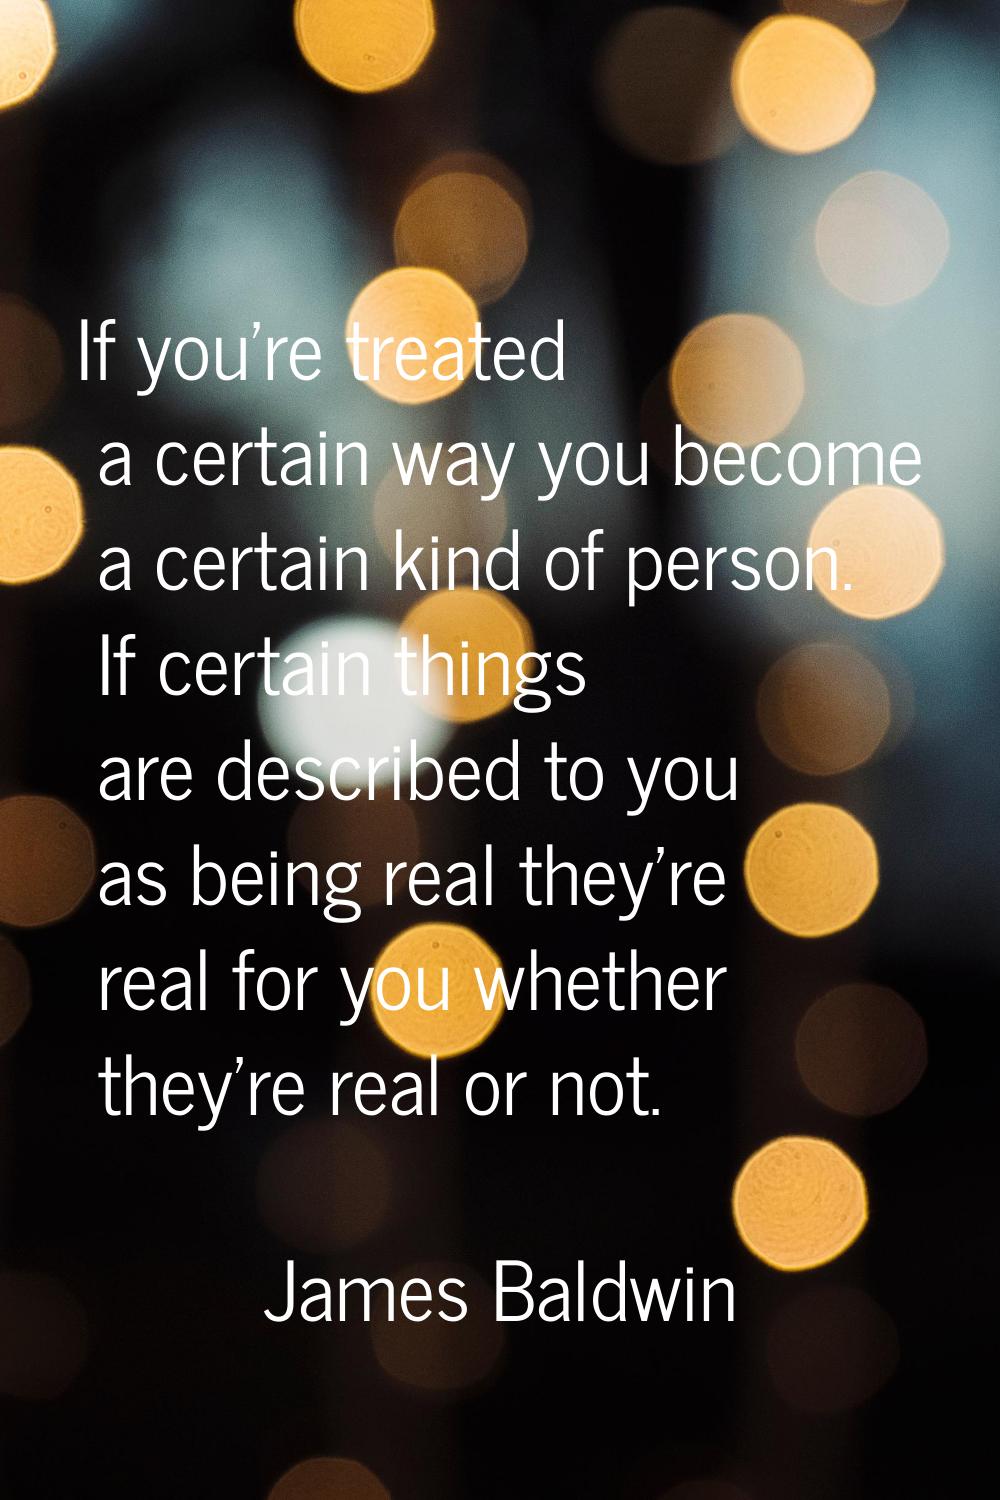 If you're treated a certain way you become a certain kind of person. If certain things are describe